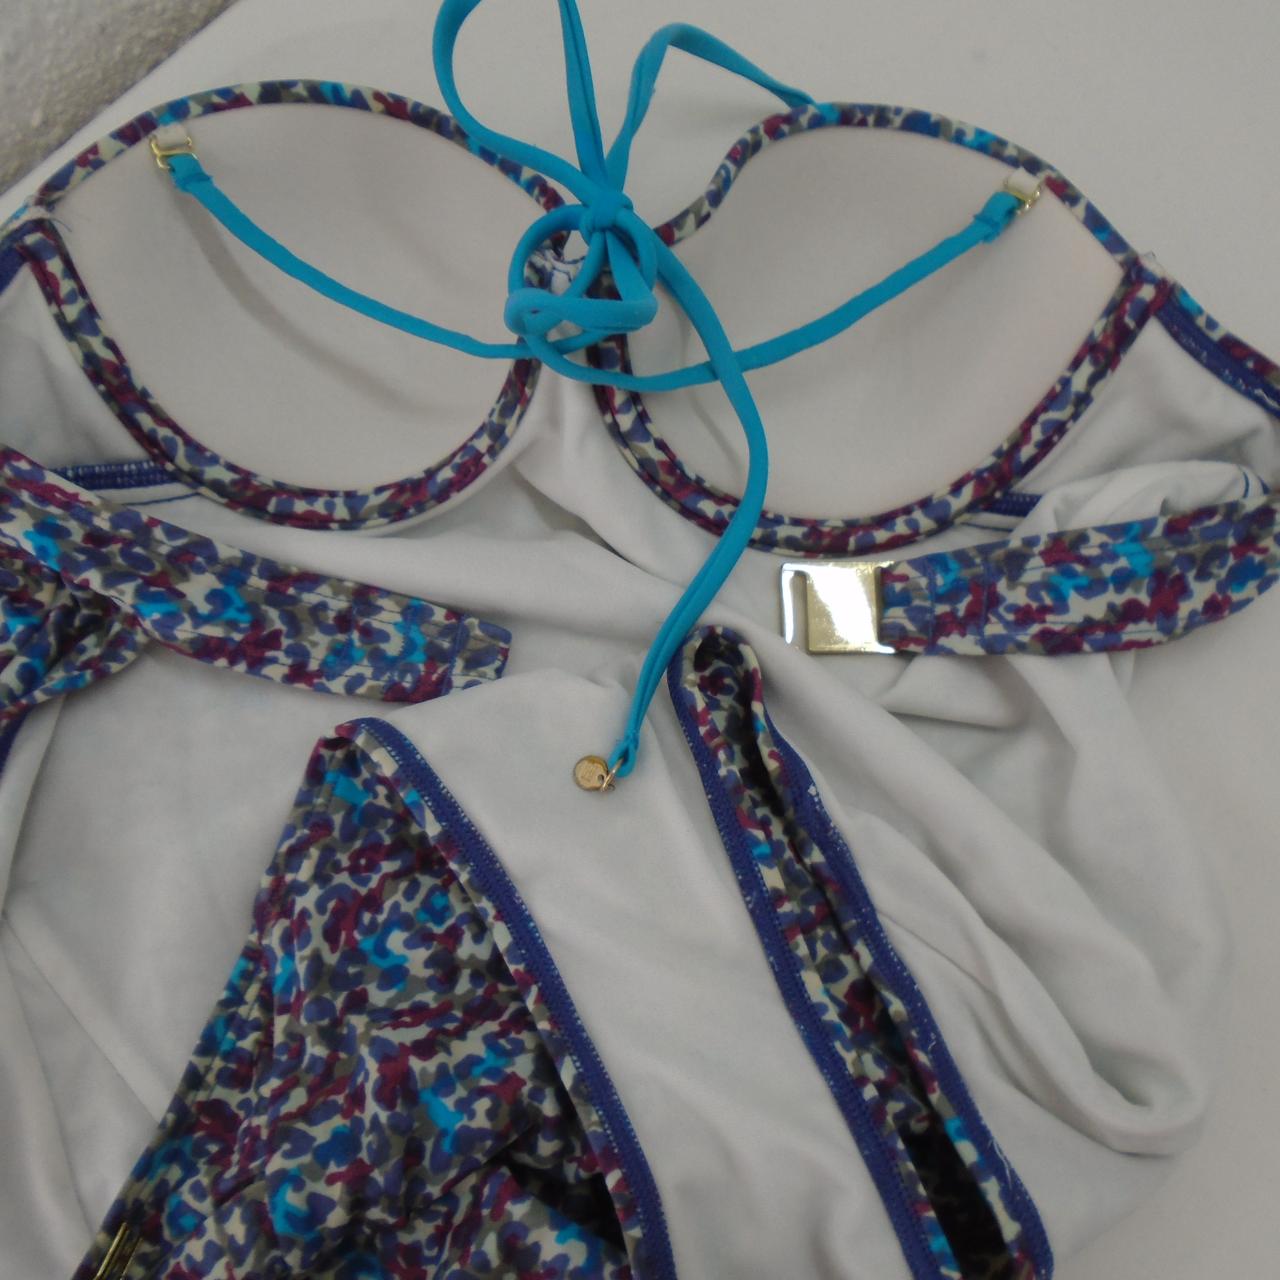 Women's Swimsuit Tommy Hilfiger. Multicolor. S. Used. Good